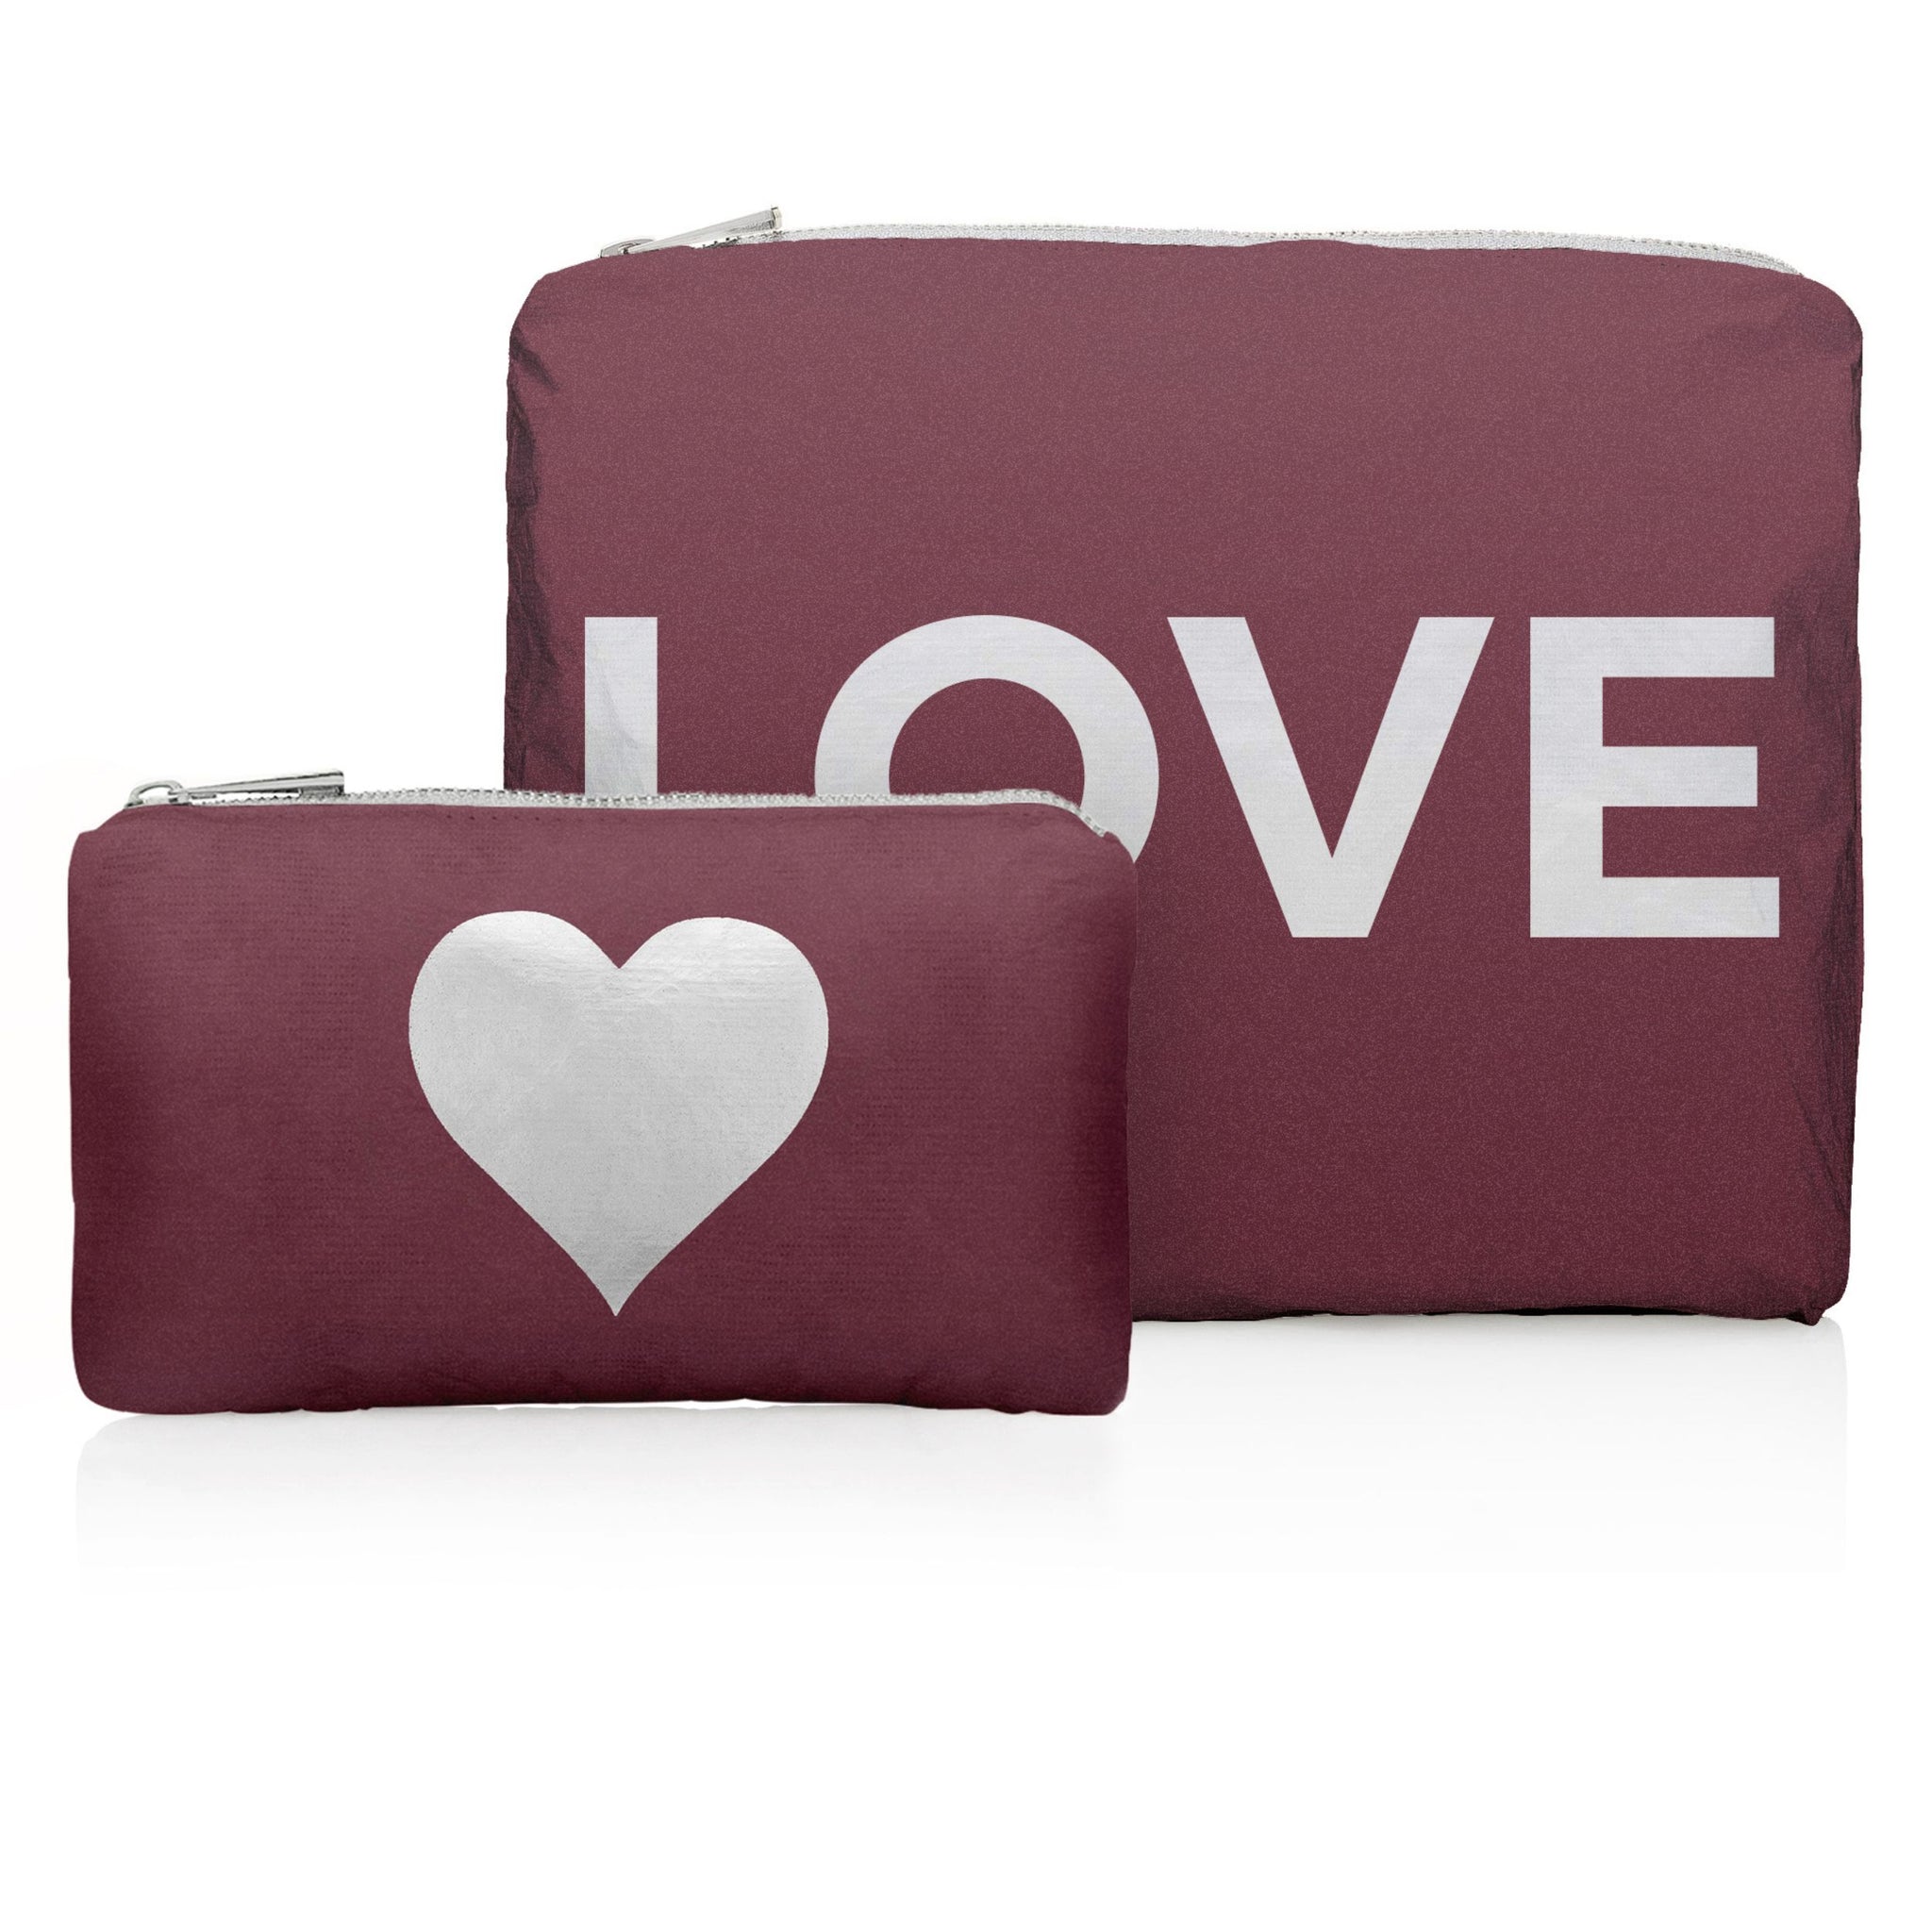 Set of two organizational packs in burgundy with silver "LOVE" & heart